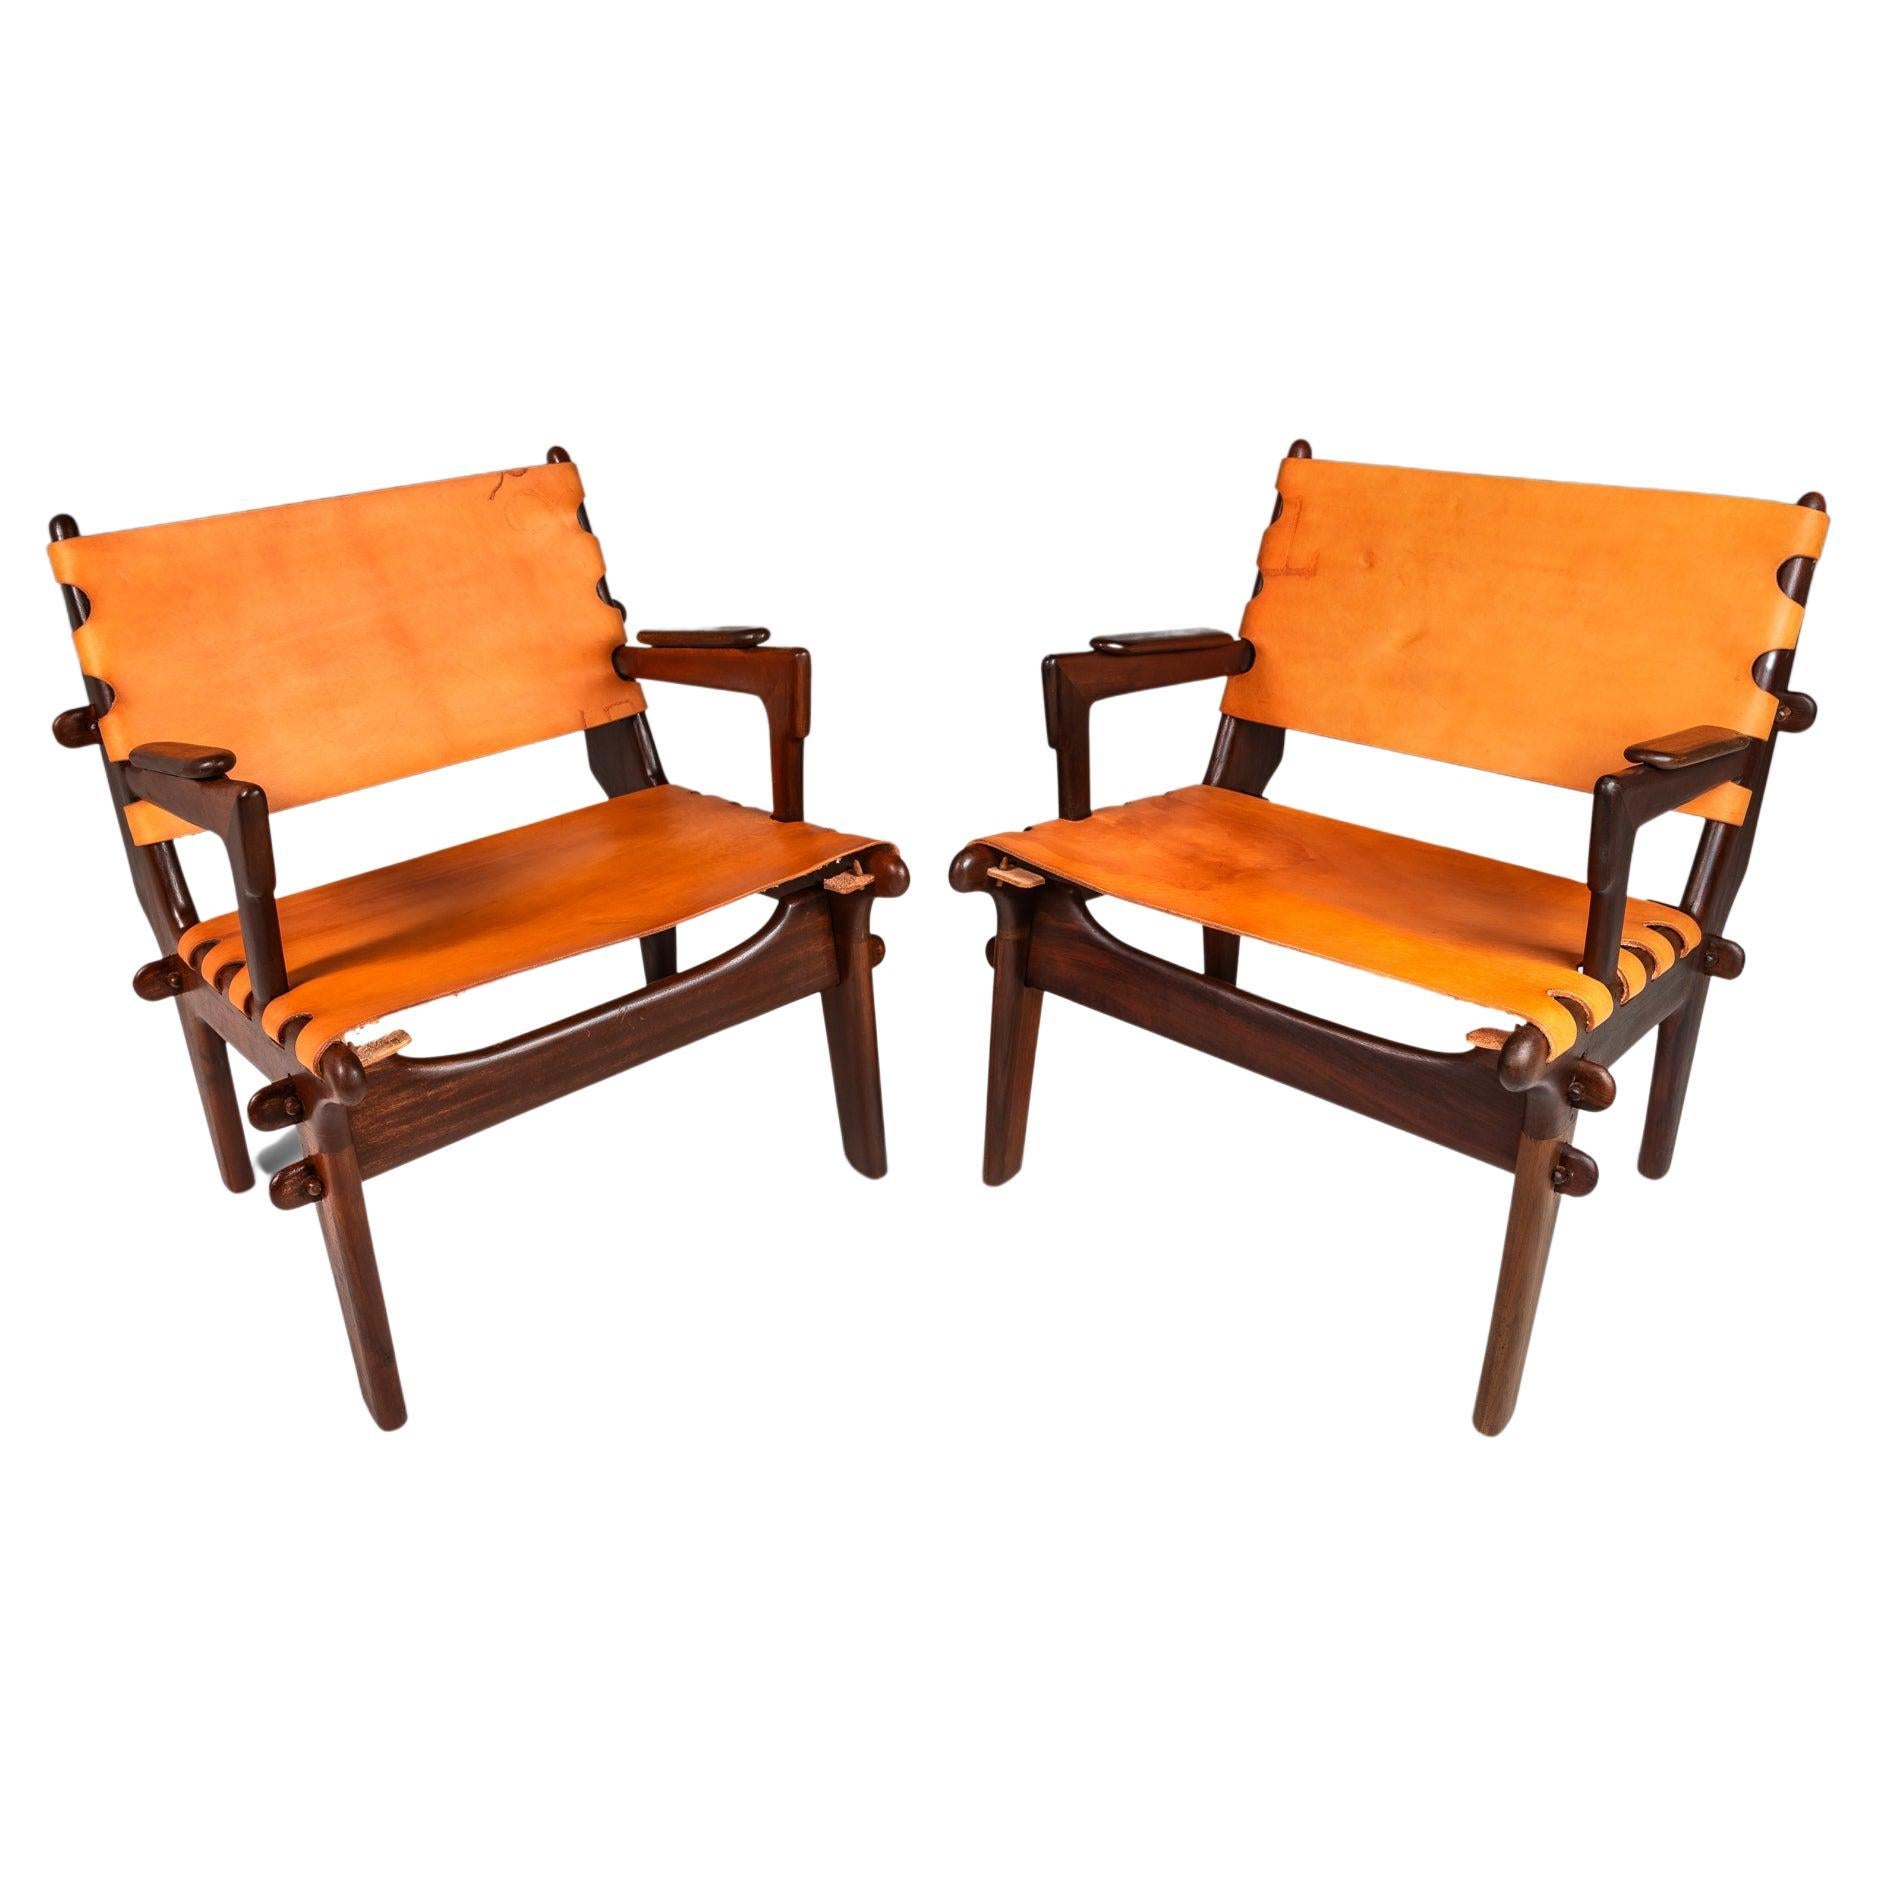 Set of 2 Tooled Leather Sling Lounge Chairs by Angel Pazmi, Ecuador, c. 1960's